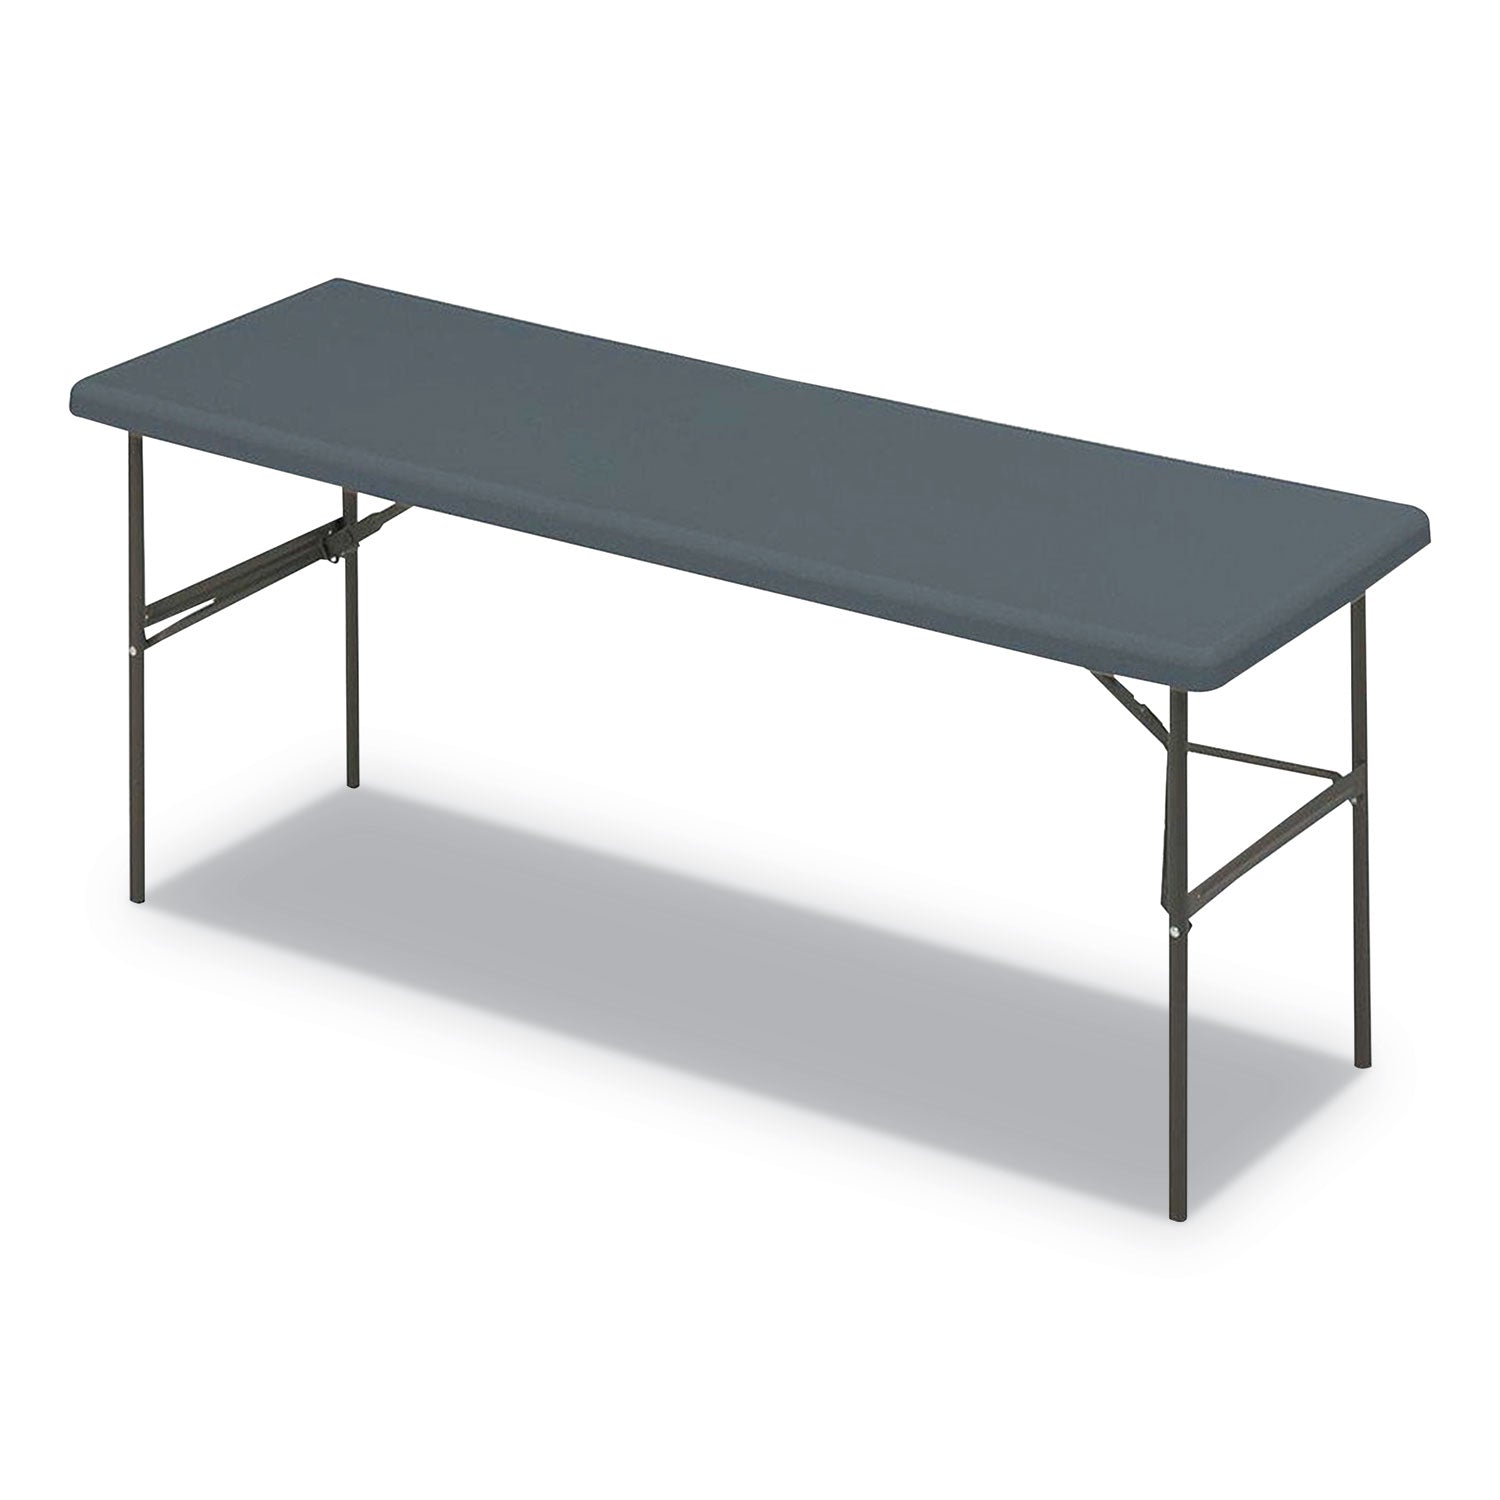 IndestrucTable Classic Folding Table, Rectangular, 72" x 24" x 29", Charcoal - 